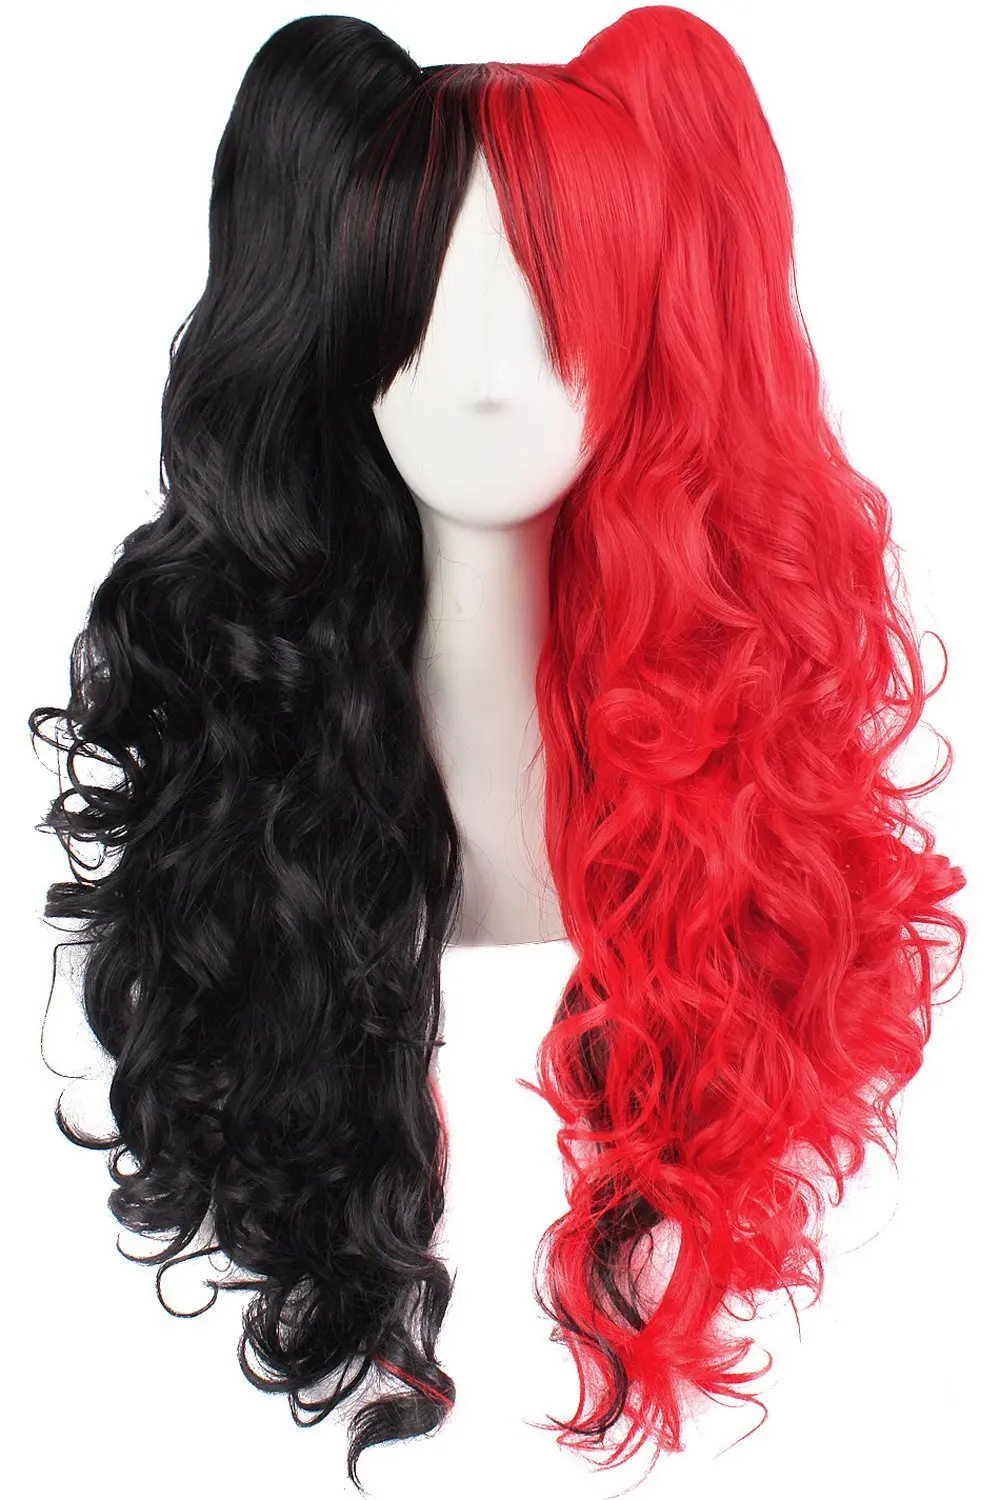 Buy Vrwig Long Curly Half Red Color Half Black Color Heat Resistant Cosplay Synthetic Hair Lace Front Wigs 26inch In Cheap Price On Alibaba Com